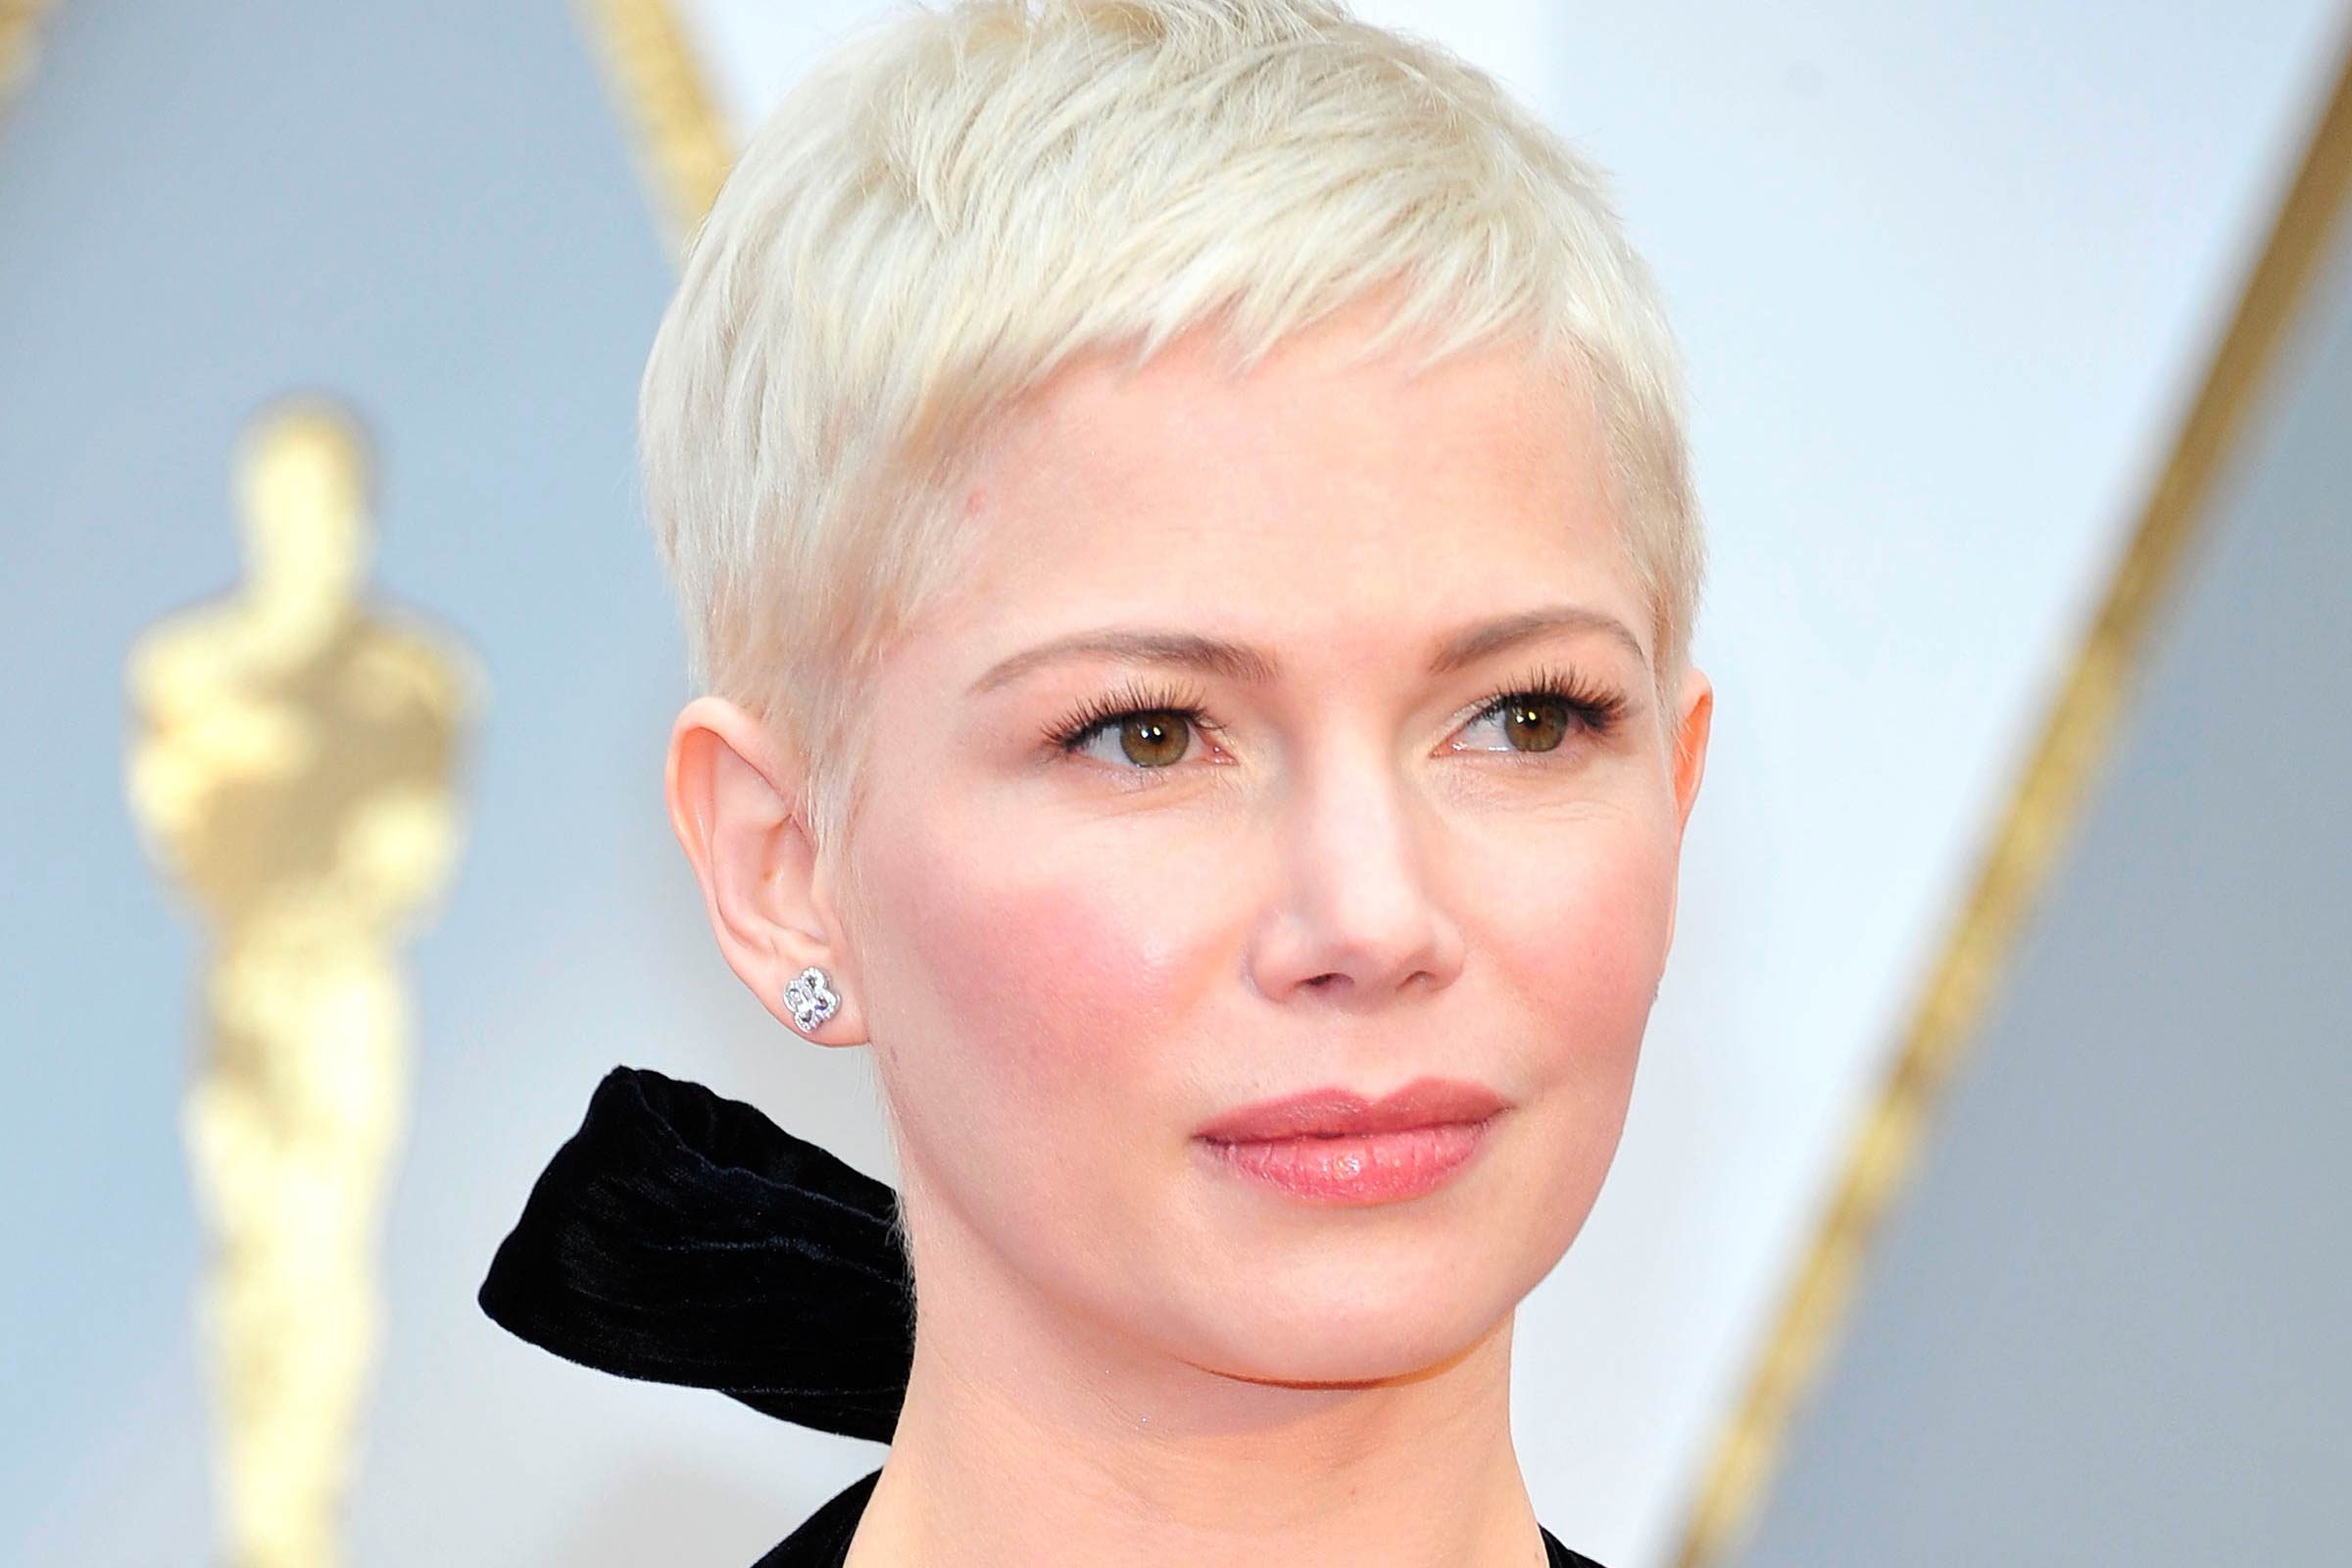 8. "Blue Tinted Short Hair: How to Make it Work for Your Skin Tone" - wide 10